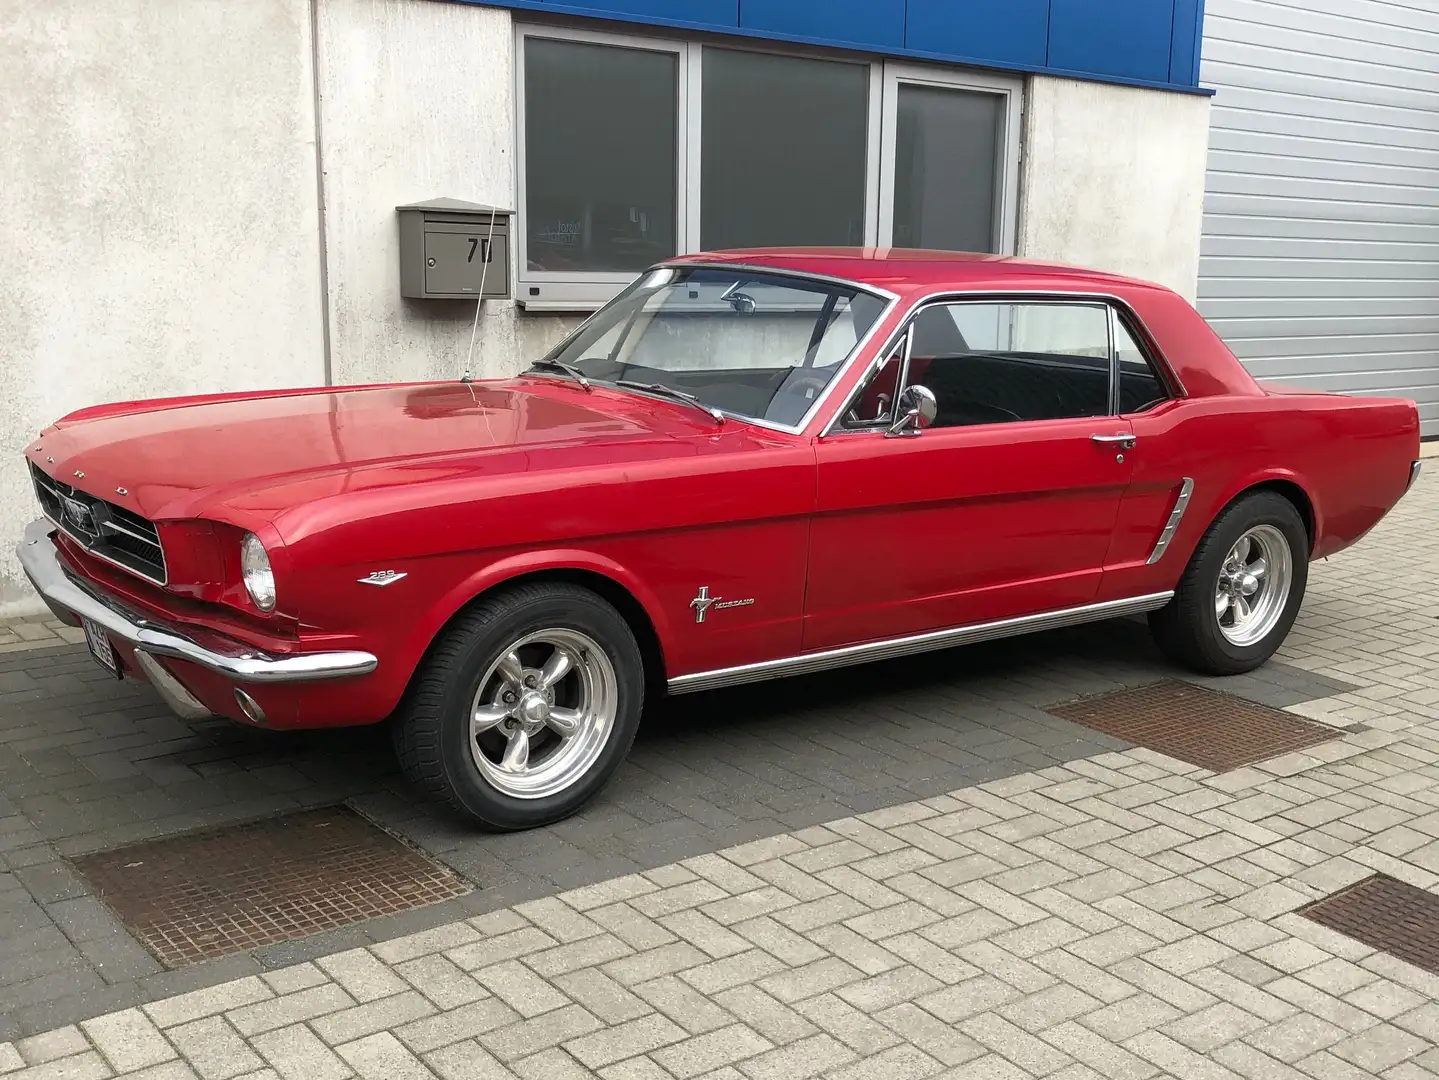 Ford Mustang crvena - 2